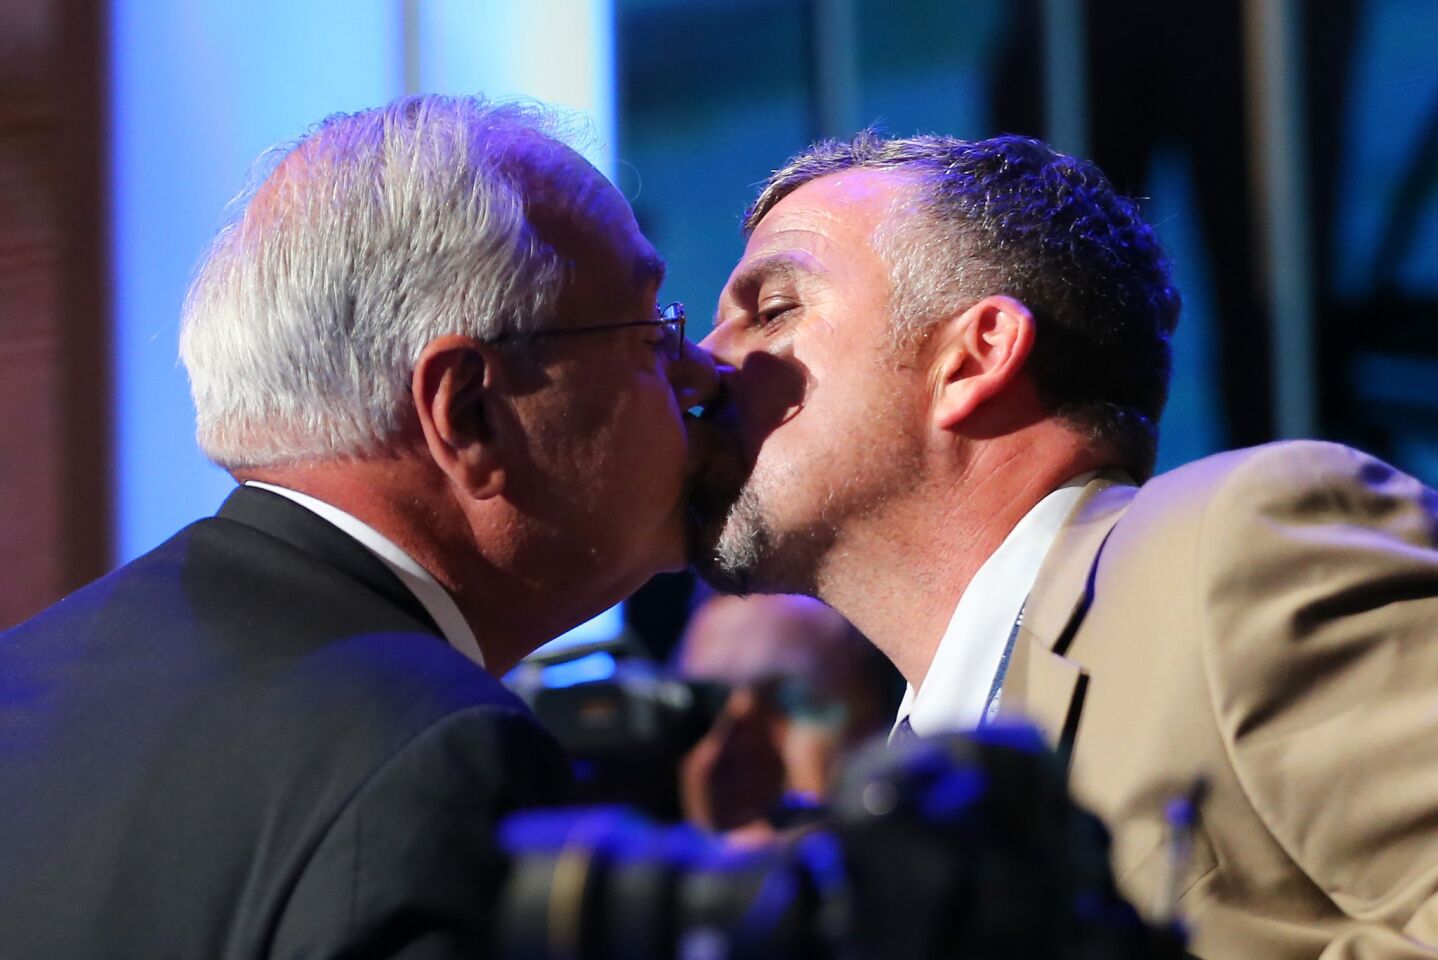 Rep. Barney Frank (D-Mass.) kisses his spouse Jim Ready (R) during the final day of the Democratic National Convention in Charlotte, N.C.